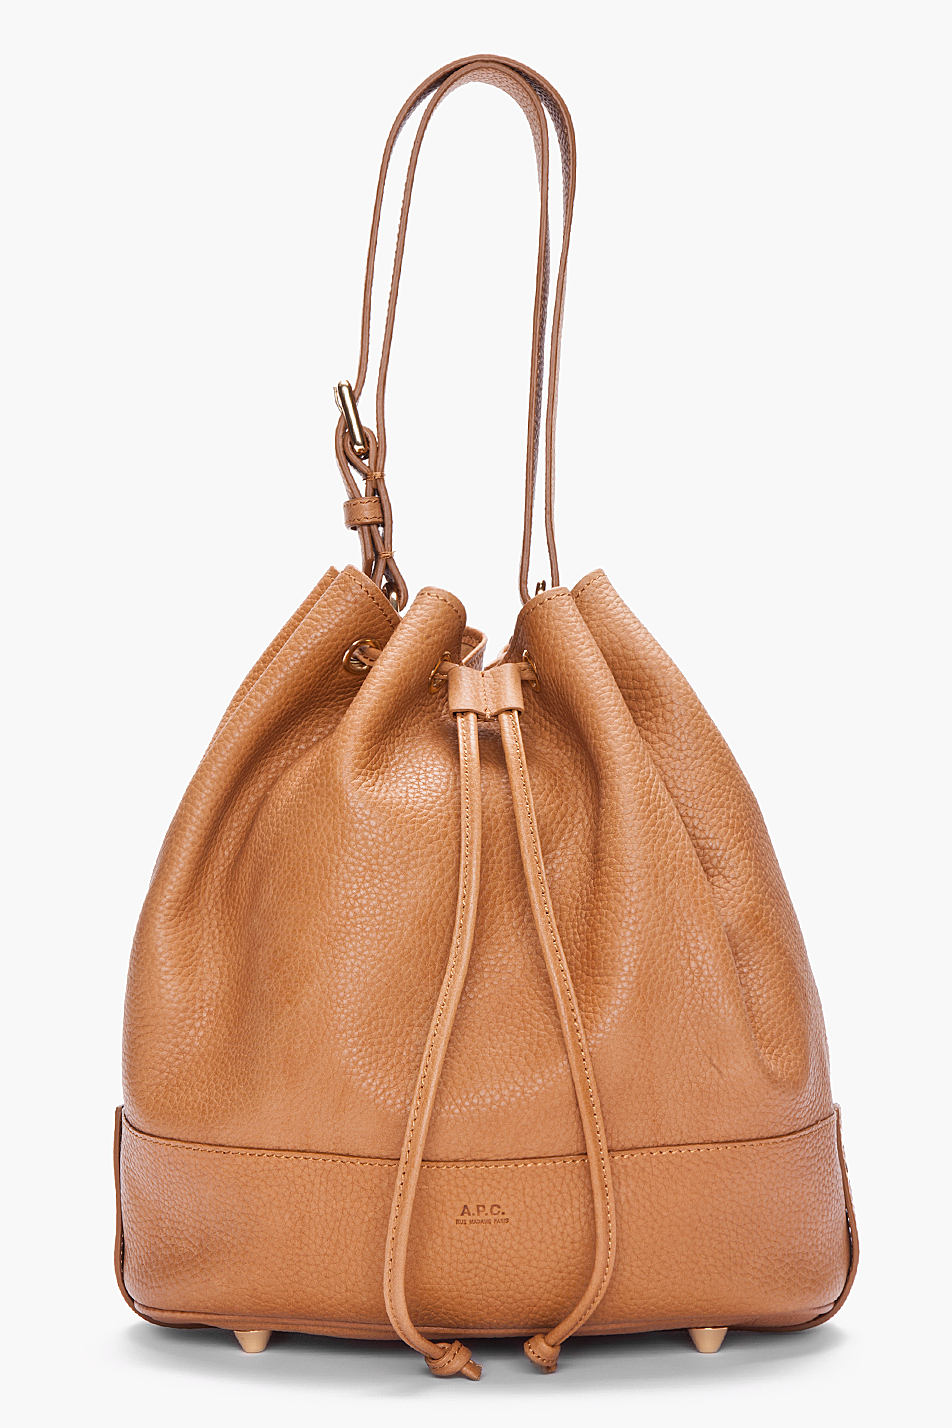 A.P.C. Brown Pebbled Leather Bucket Bag - Lyst